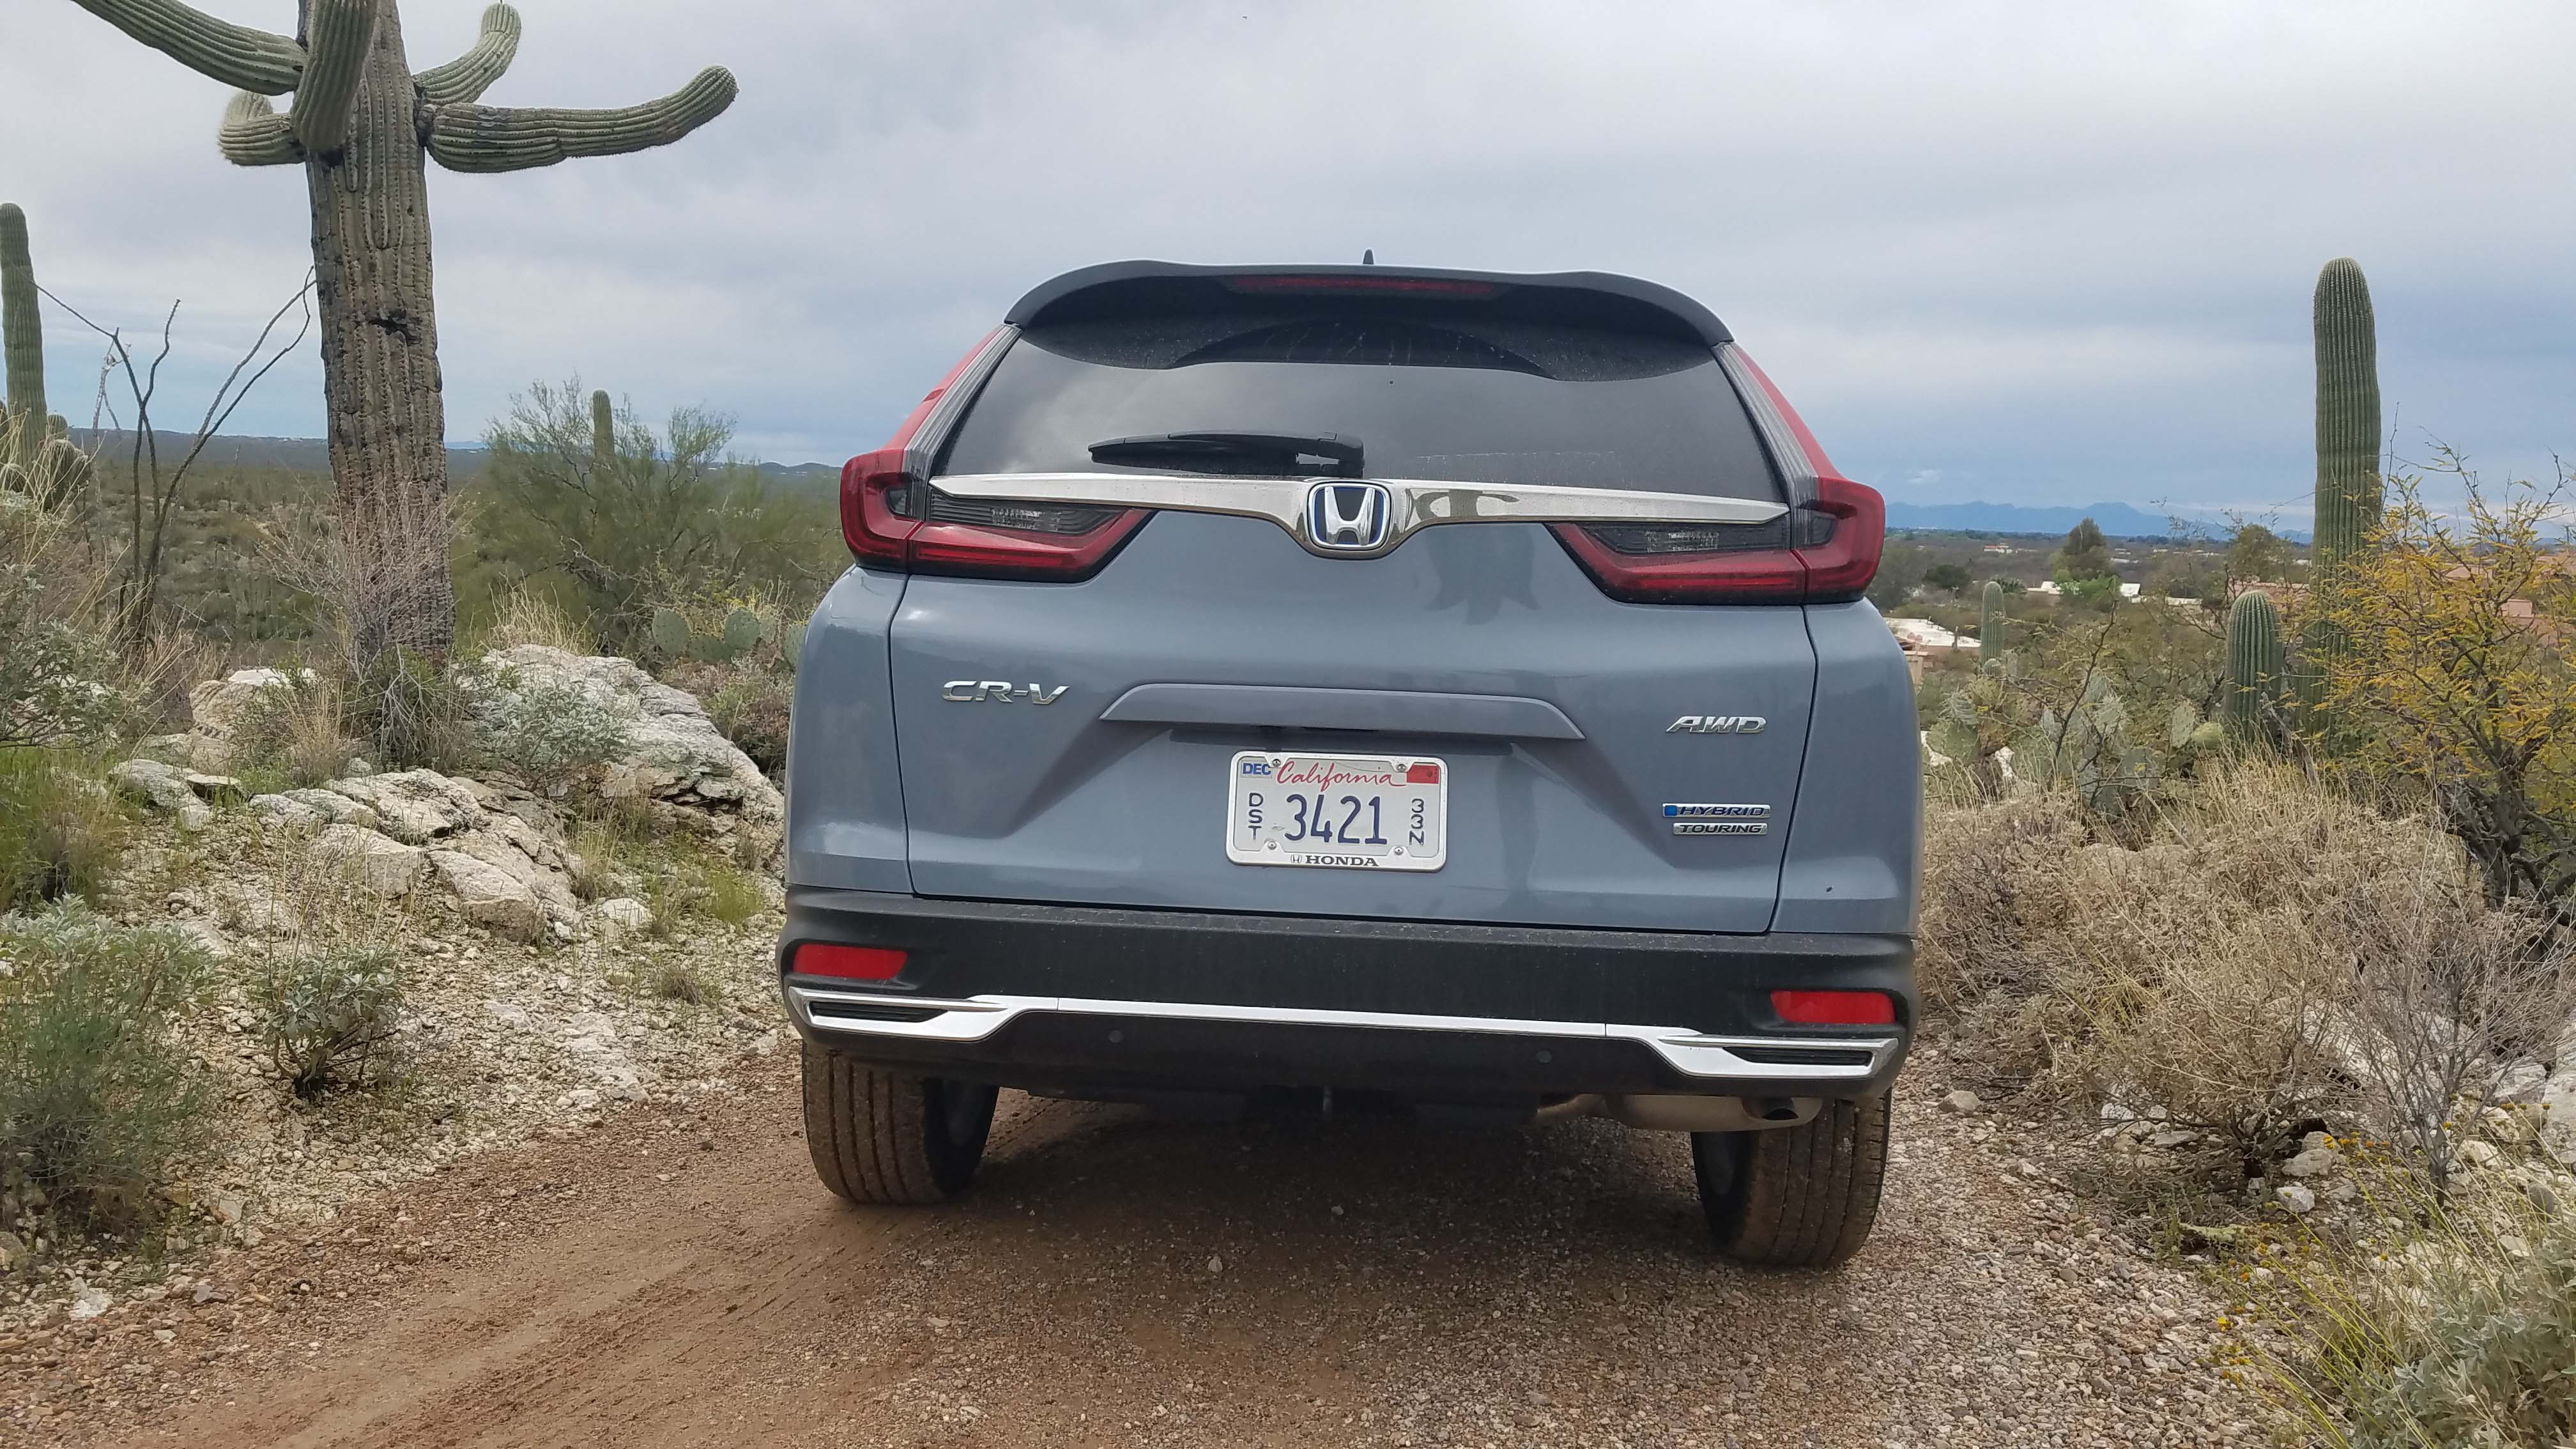 The 2020 Honda CR-V Hybrid comes standard in AWD. Its boomerang rear taillights are a CR-V signature.